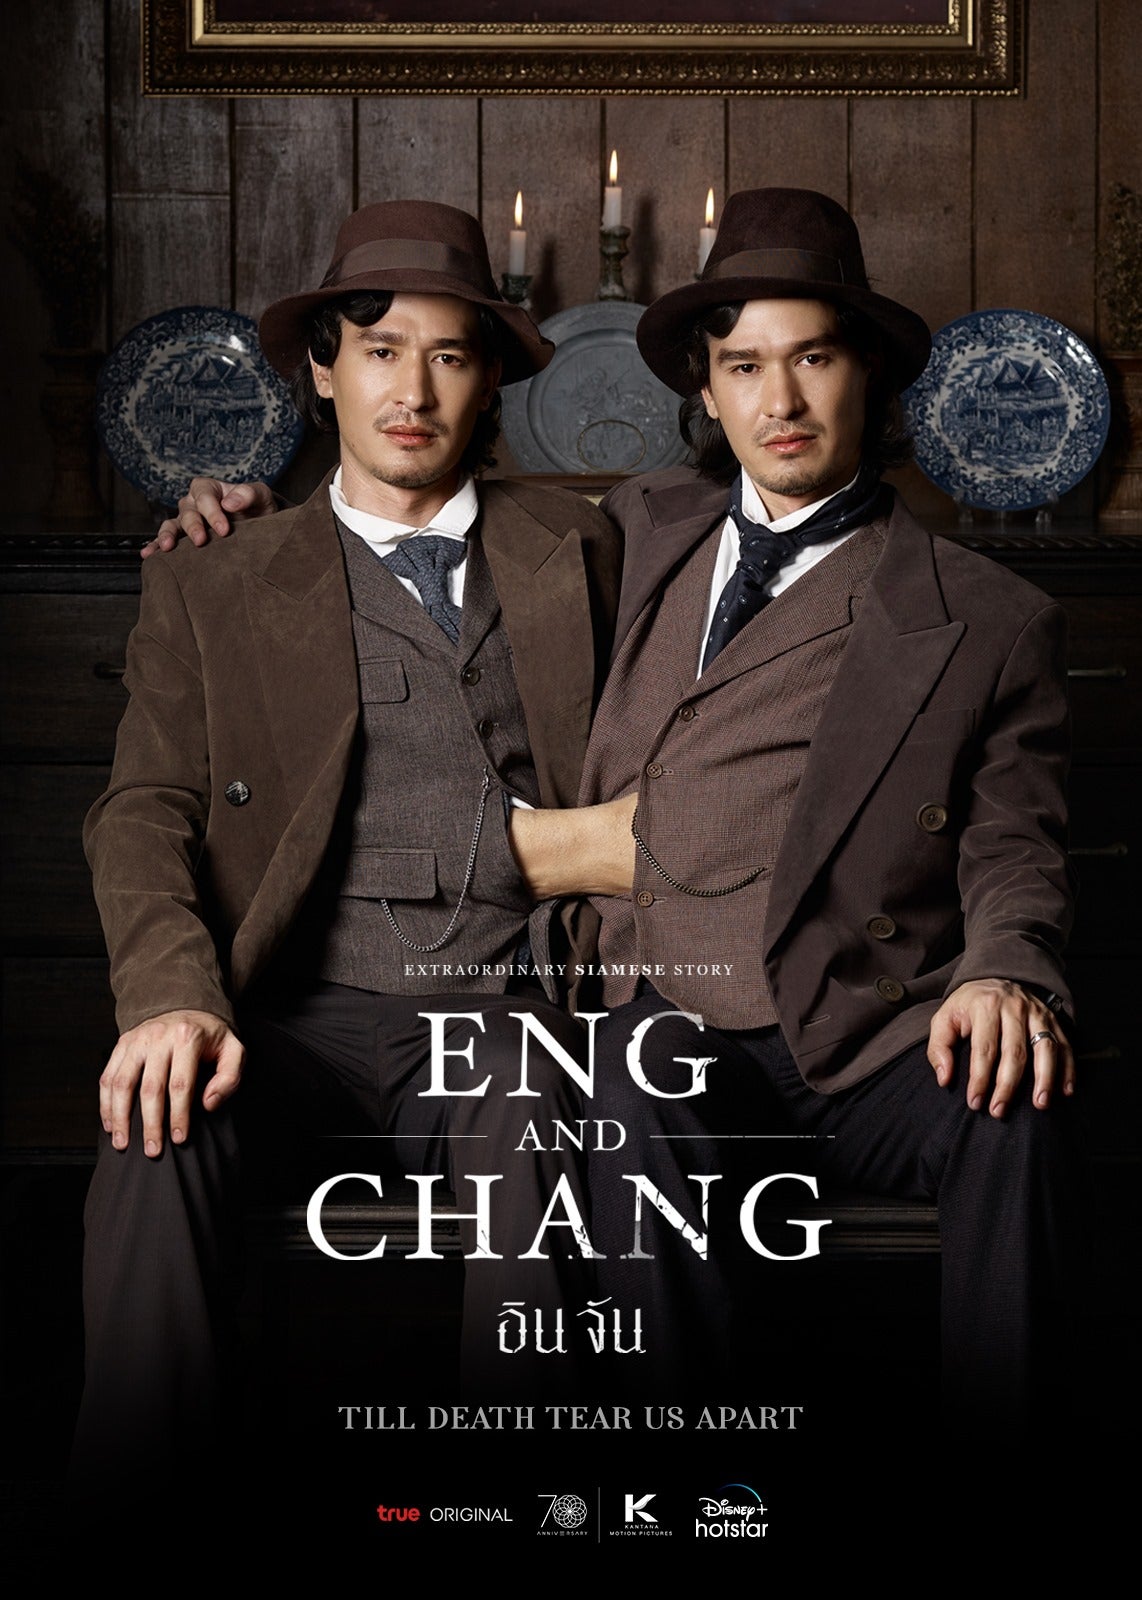 TV ratings for Extraordinary Siamese Story: Eng And Chang (อินจัน) in Poland. Disney+ TV series